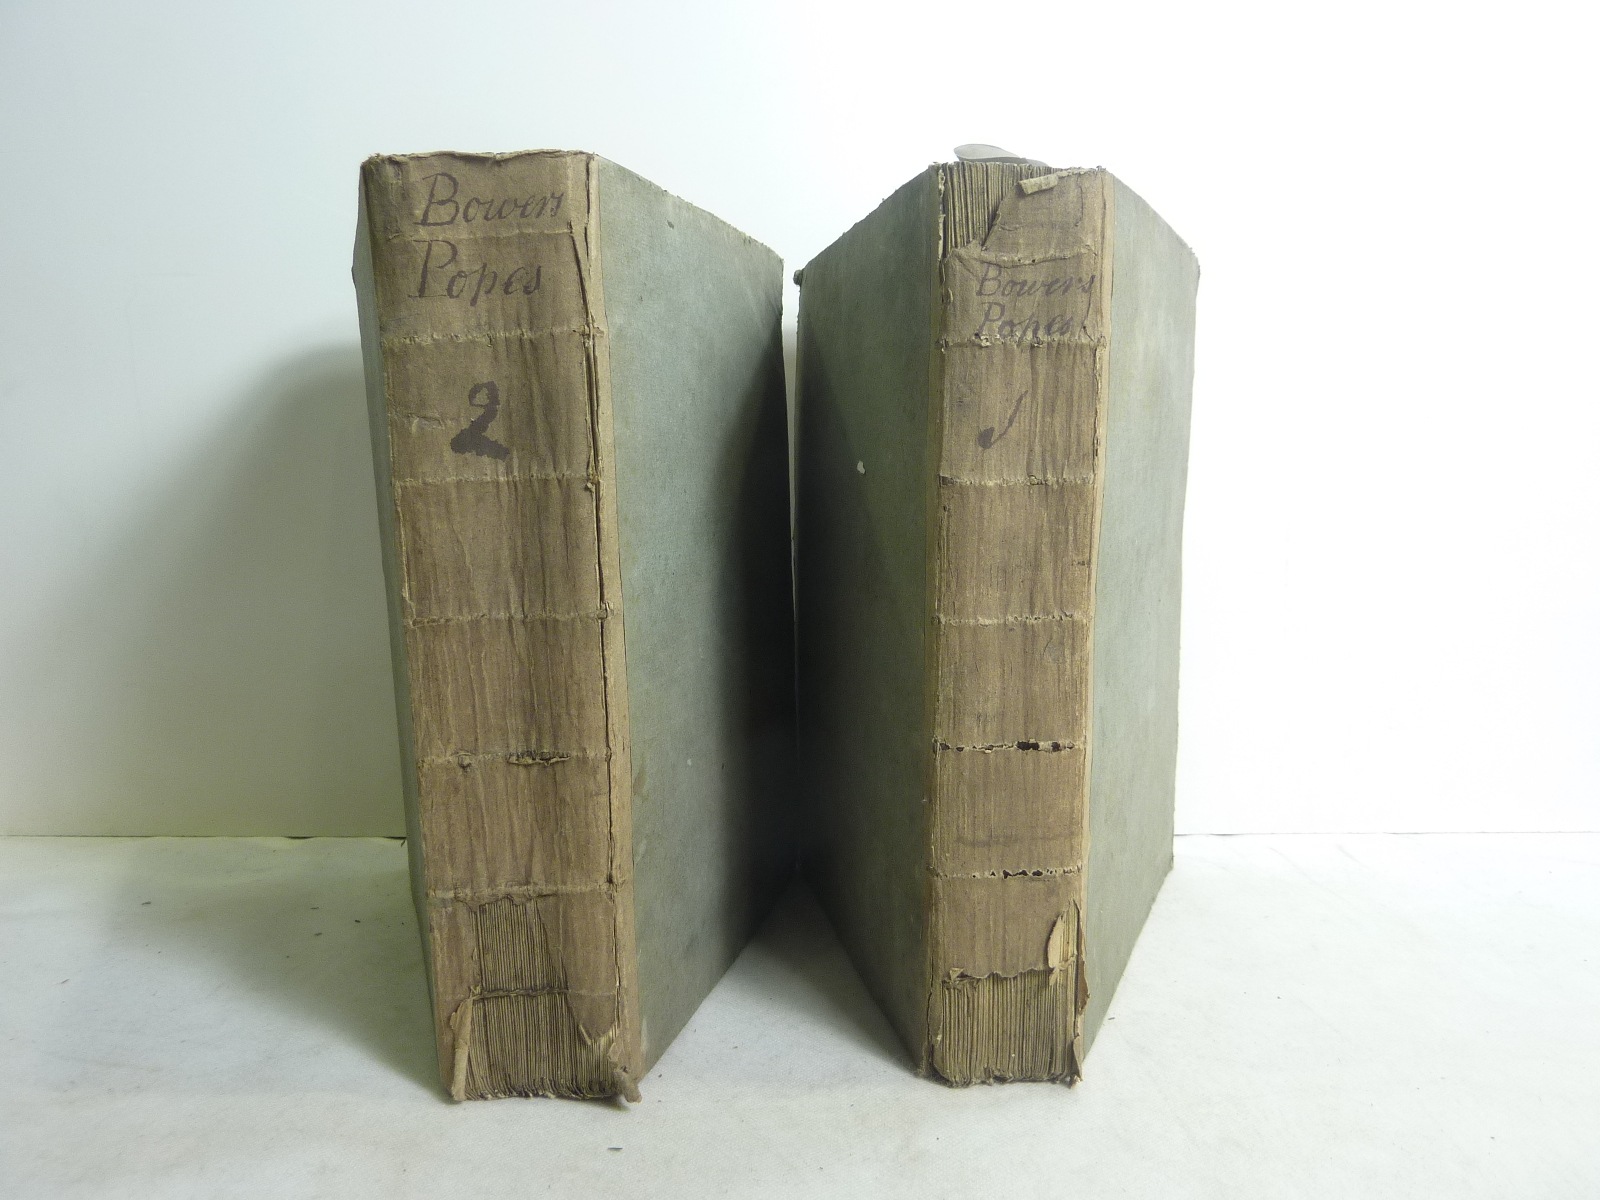 BOWER ARCHIBALD. The History of the Popes. Vols. 1 & 2. Orig. brds. 1750. - Image 4 of 4